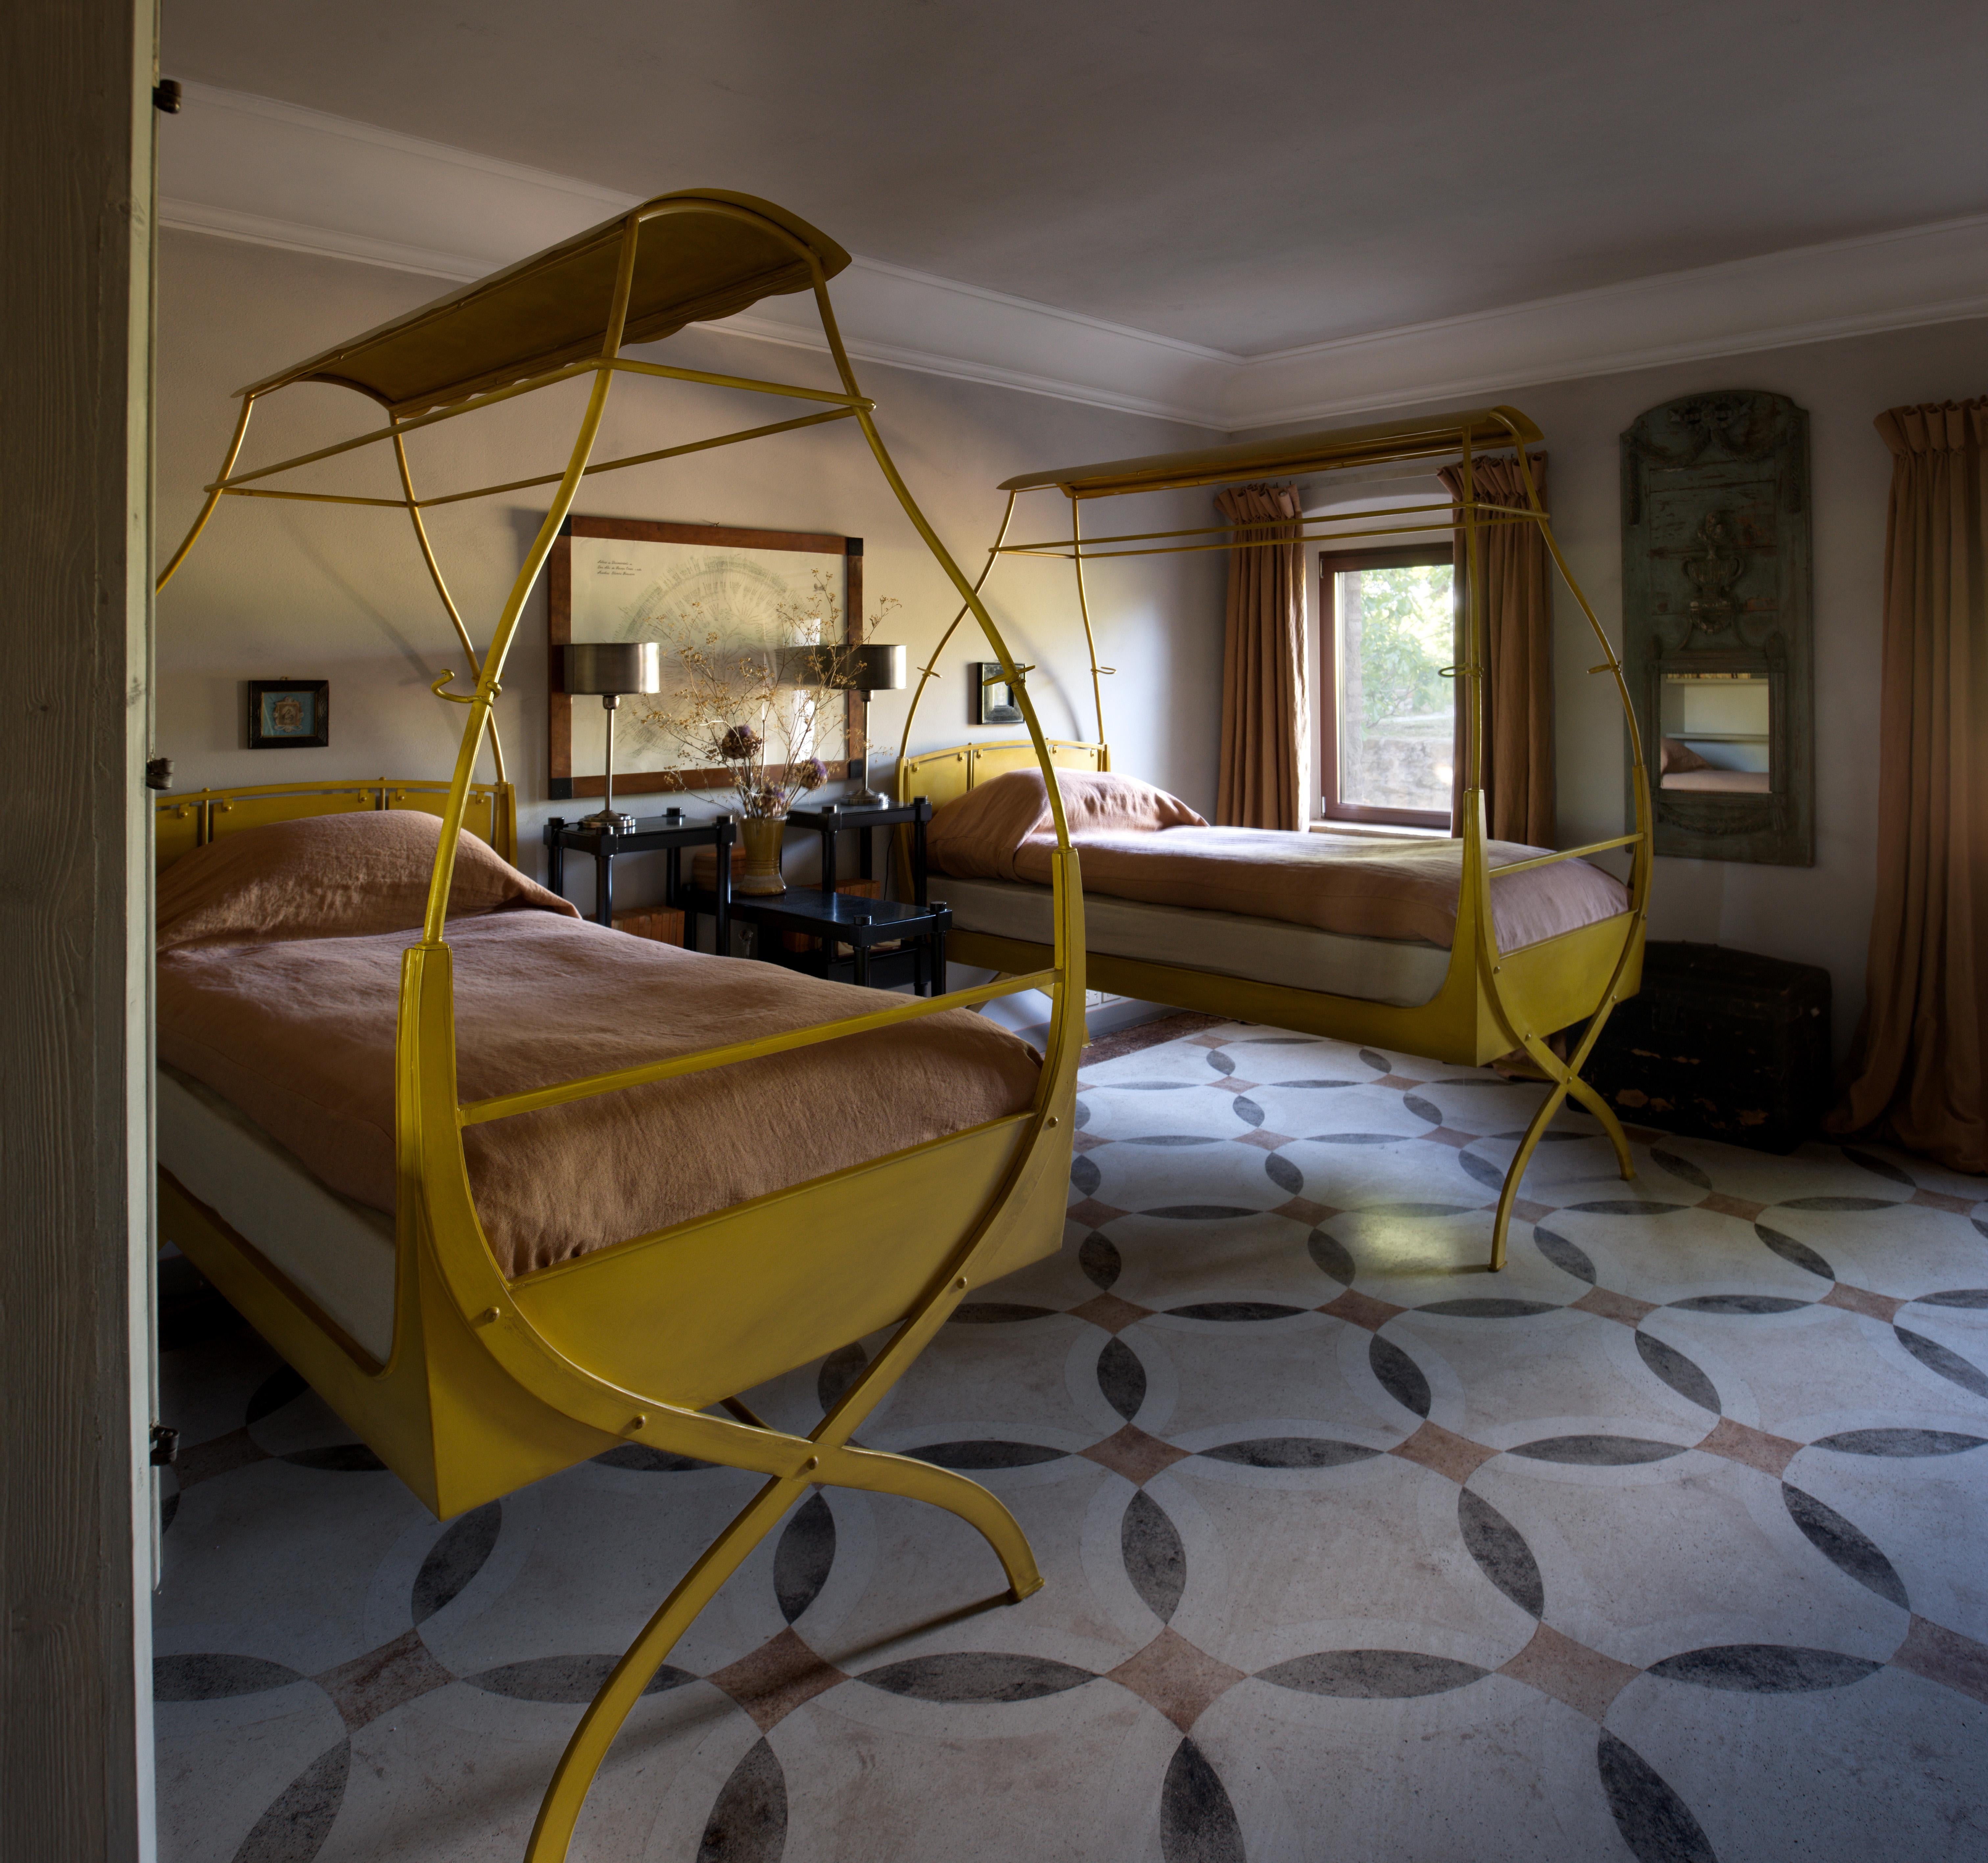 A painted steel X-frame bed
B.B. - A surreal interpretation of a Classic Italian design, part fairground ride and part swing. I love its sinuous form. Canary yellow seems to suit it best.
Specifications: painted steel, able to take either a